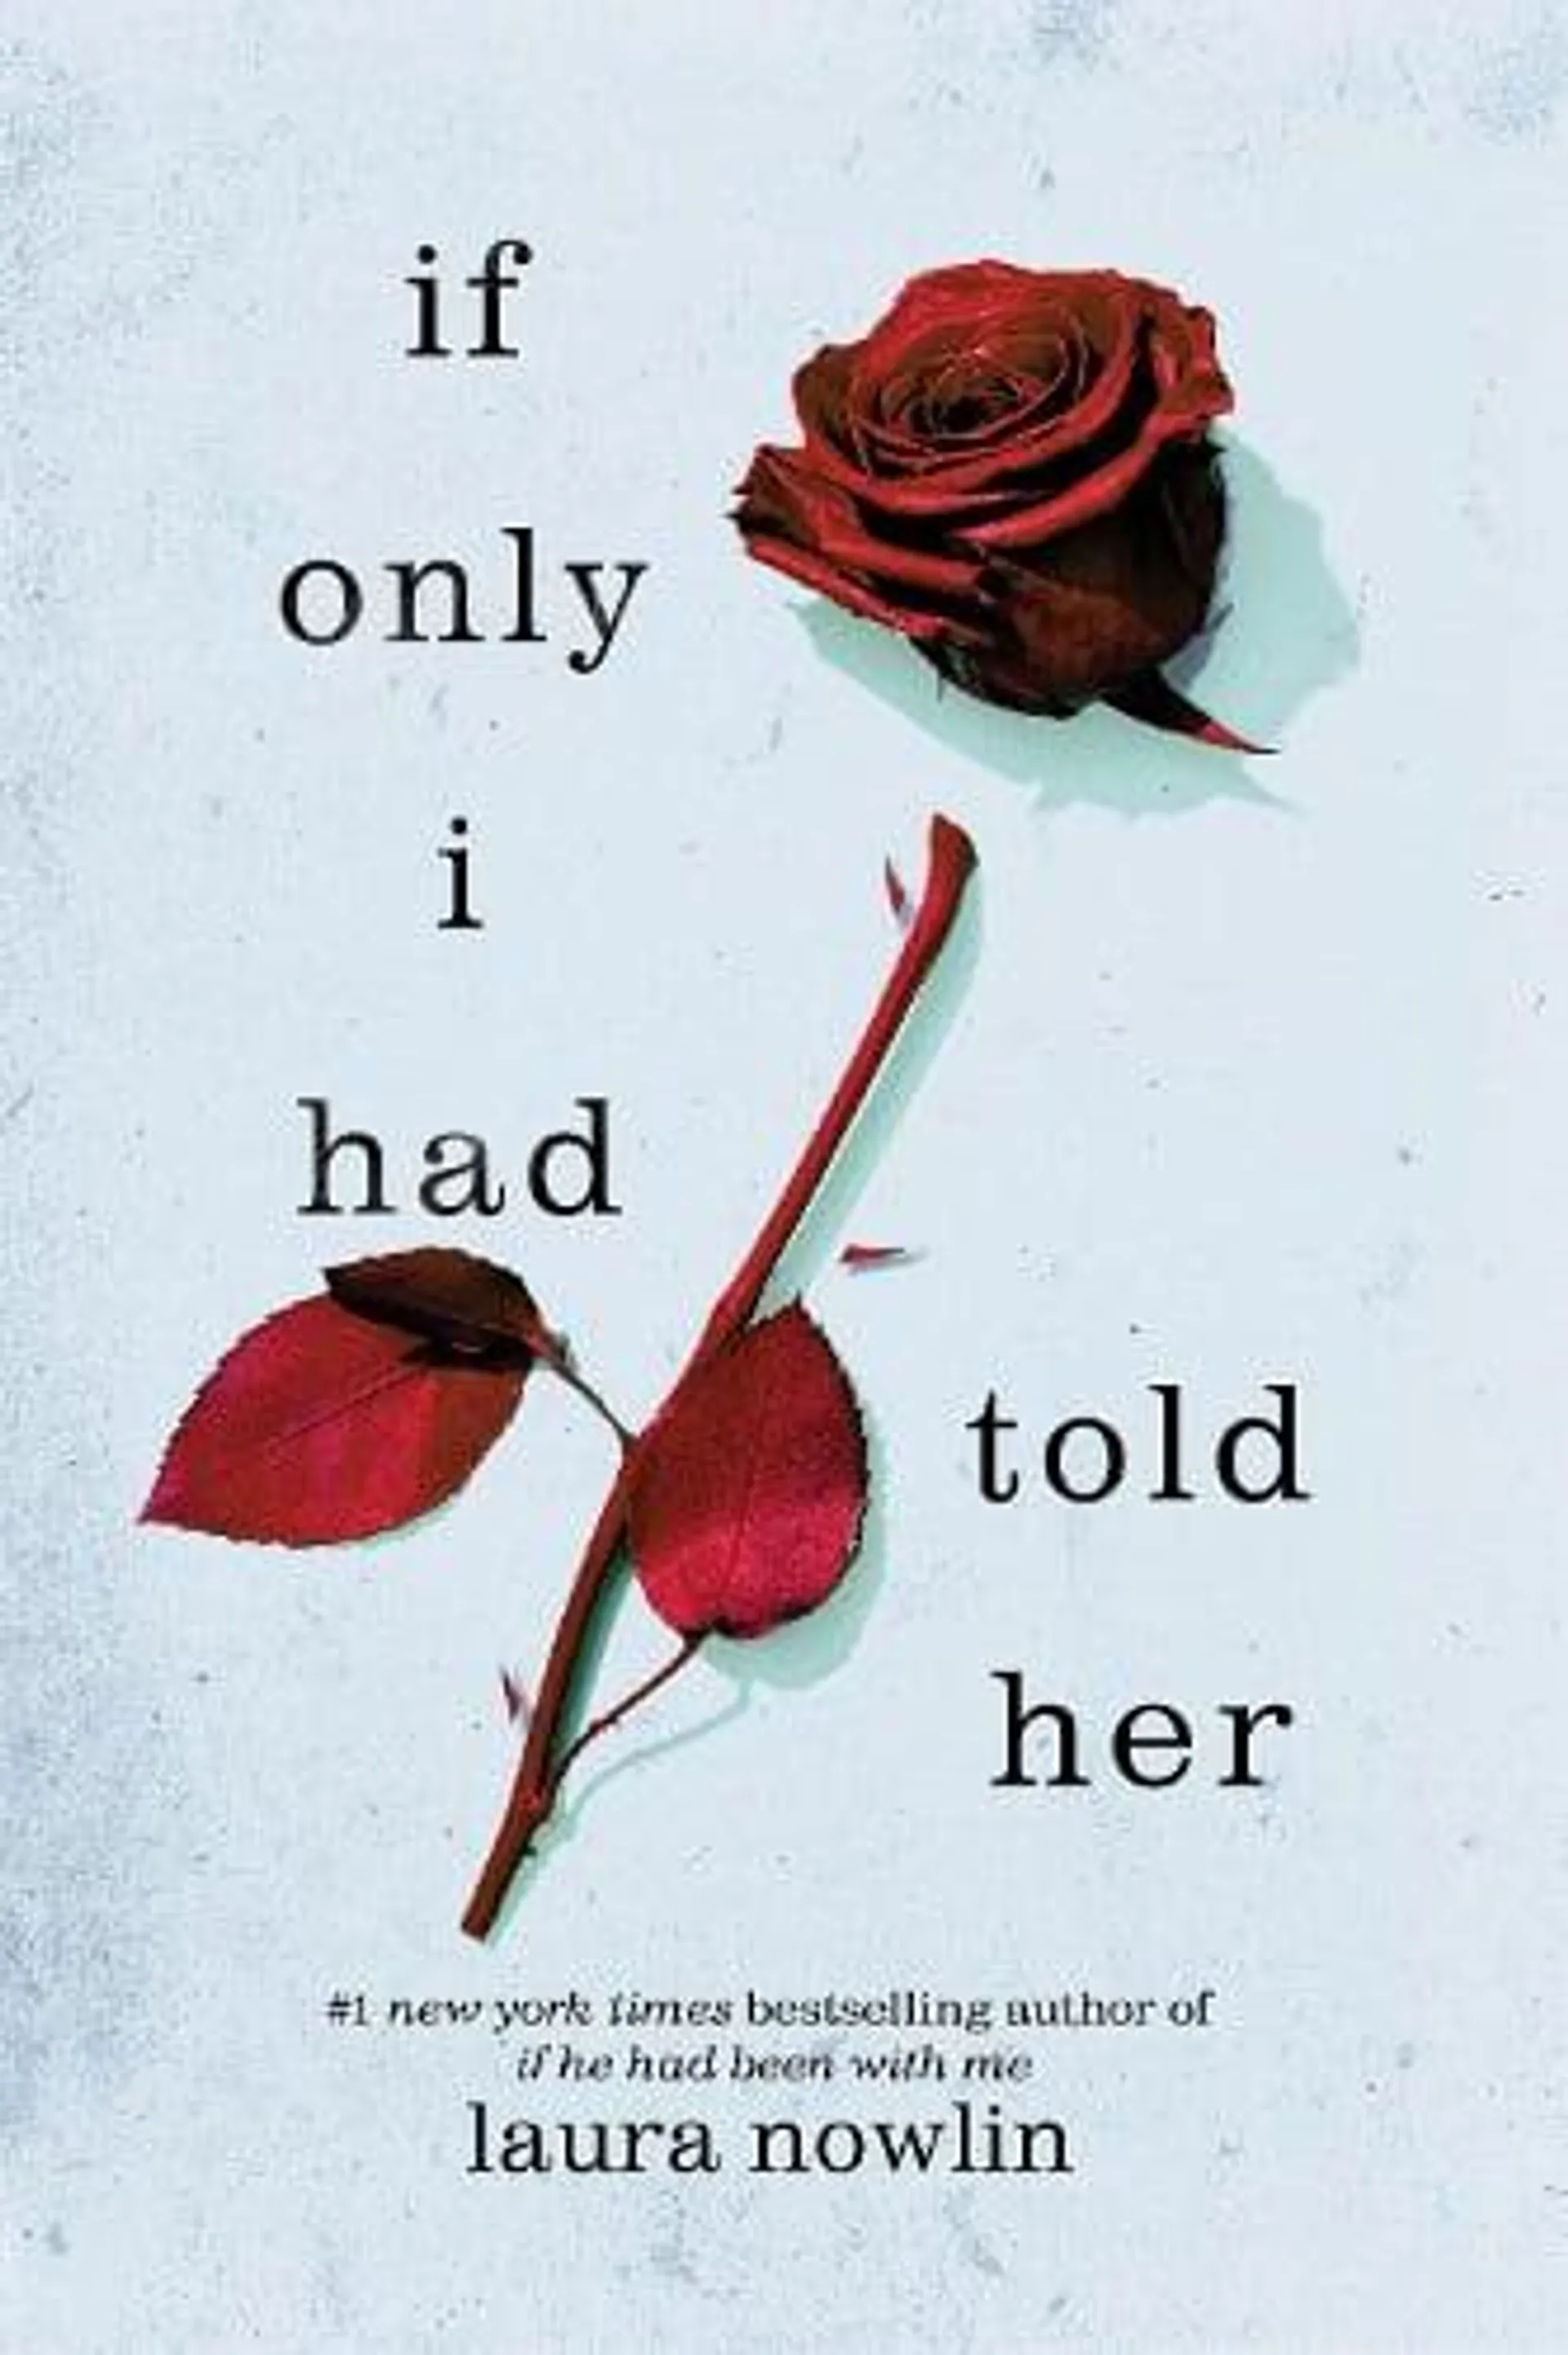 If Only I Had Told Her (Paperback)